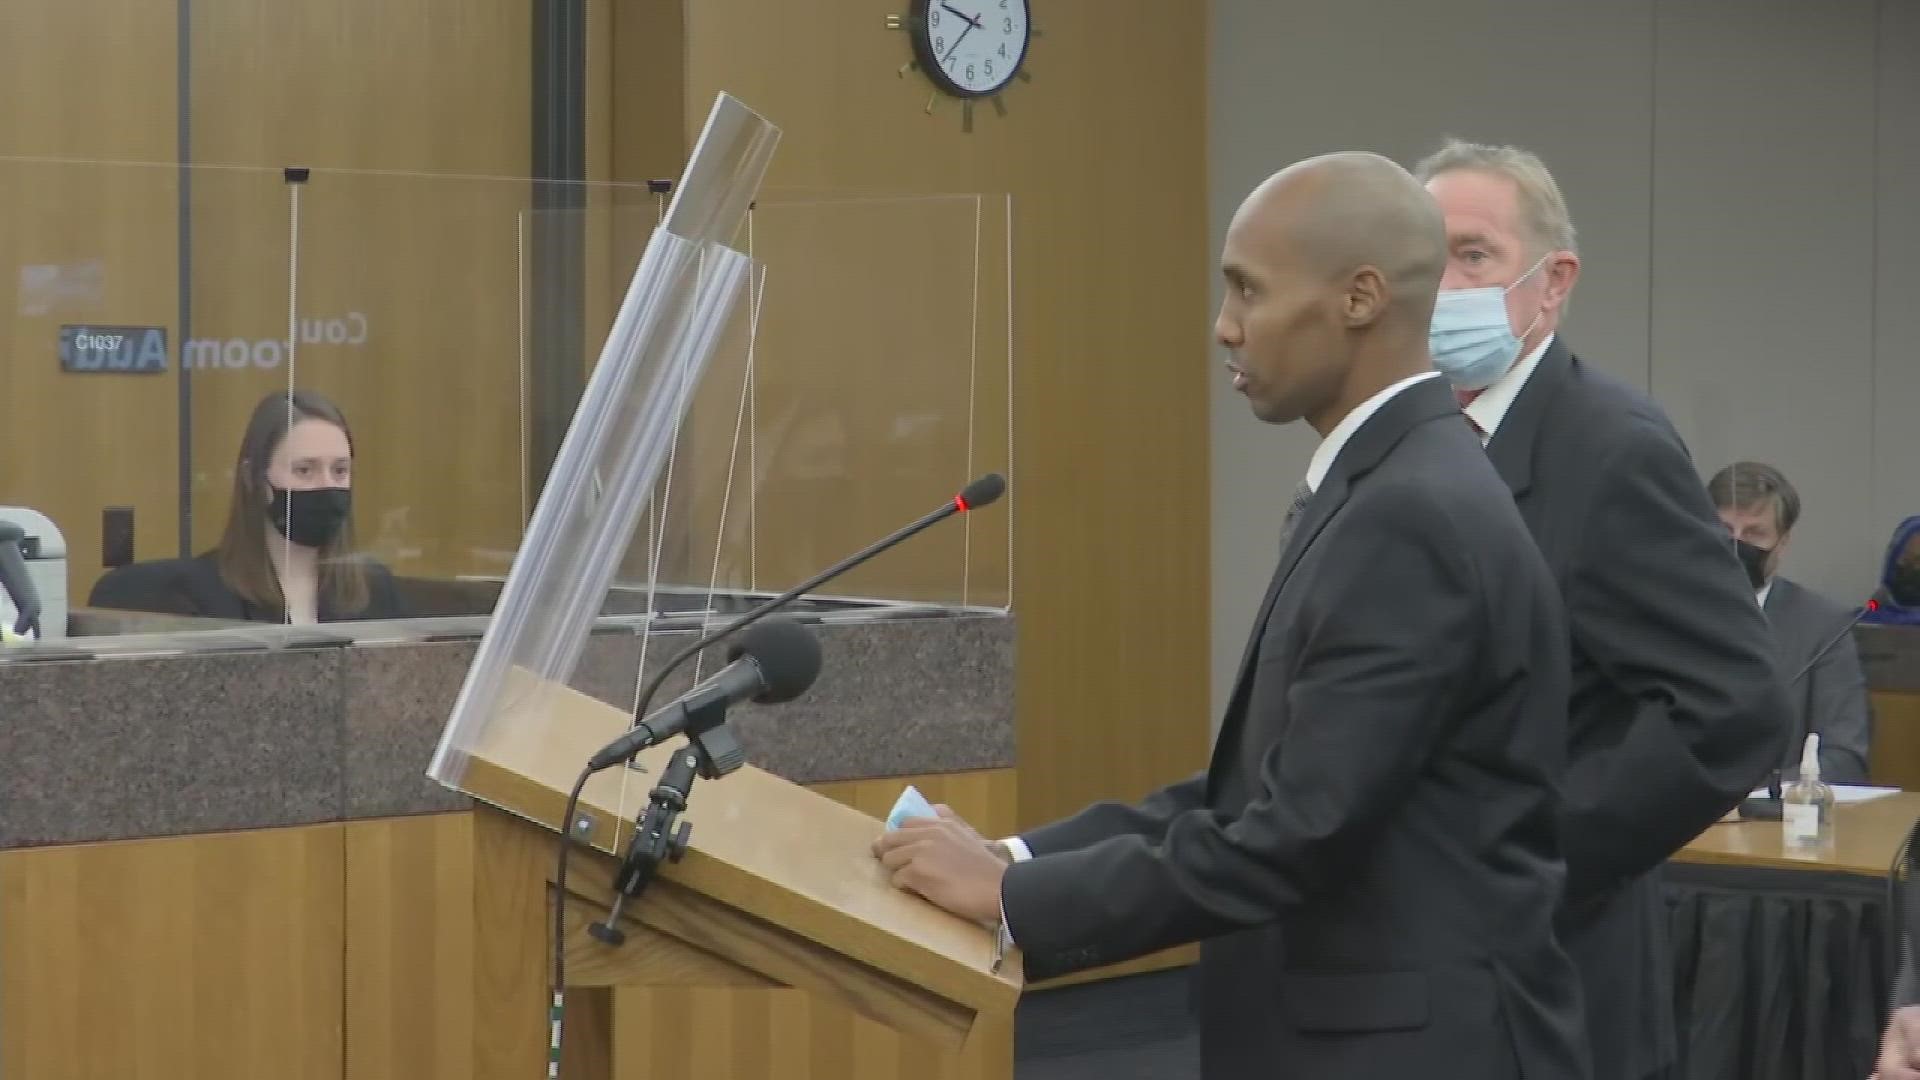 Given a chance to speak in court Mohamed Noor apologized to Justine Ruszczyk's fiance and family, and promised to be a unifier as they asked.